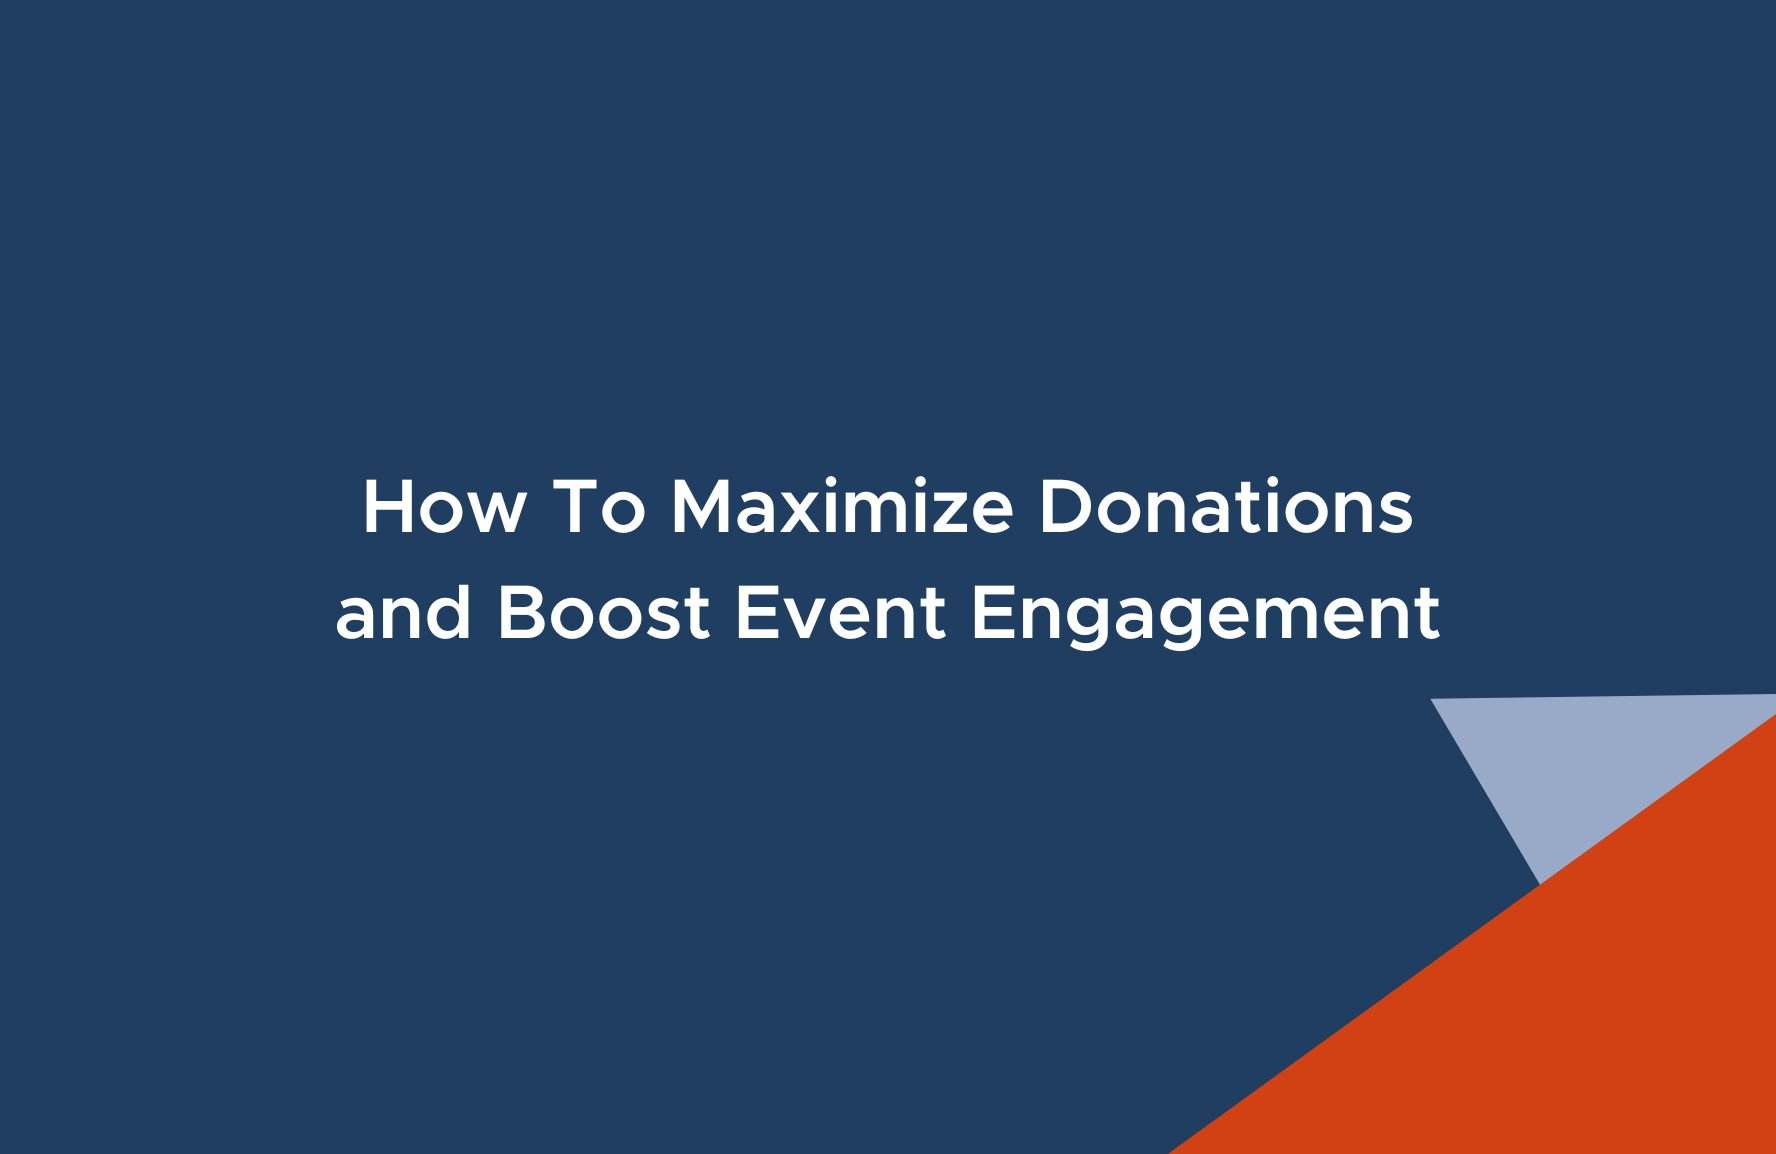 nonprofit text message marketing can boost peer-to-peer event engagement and increase donations.